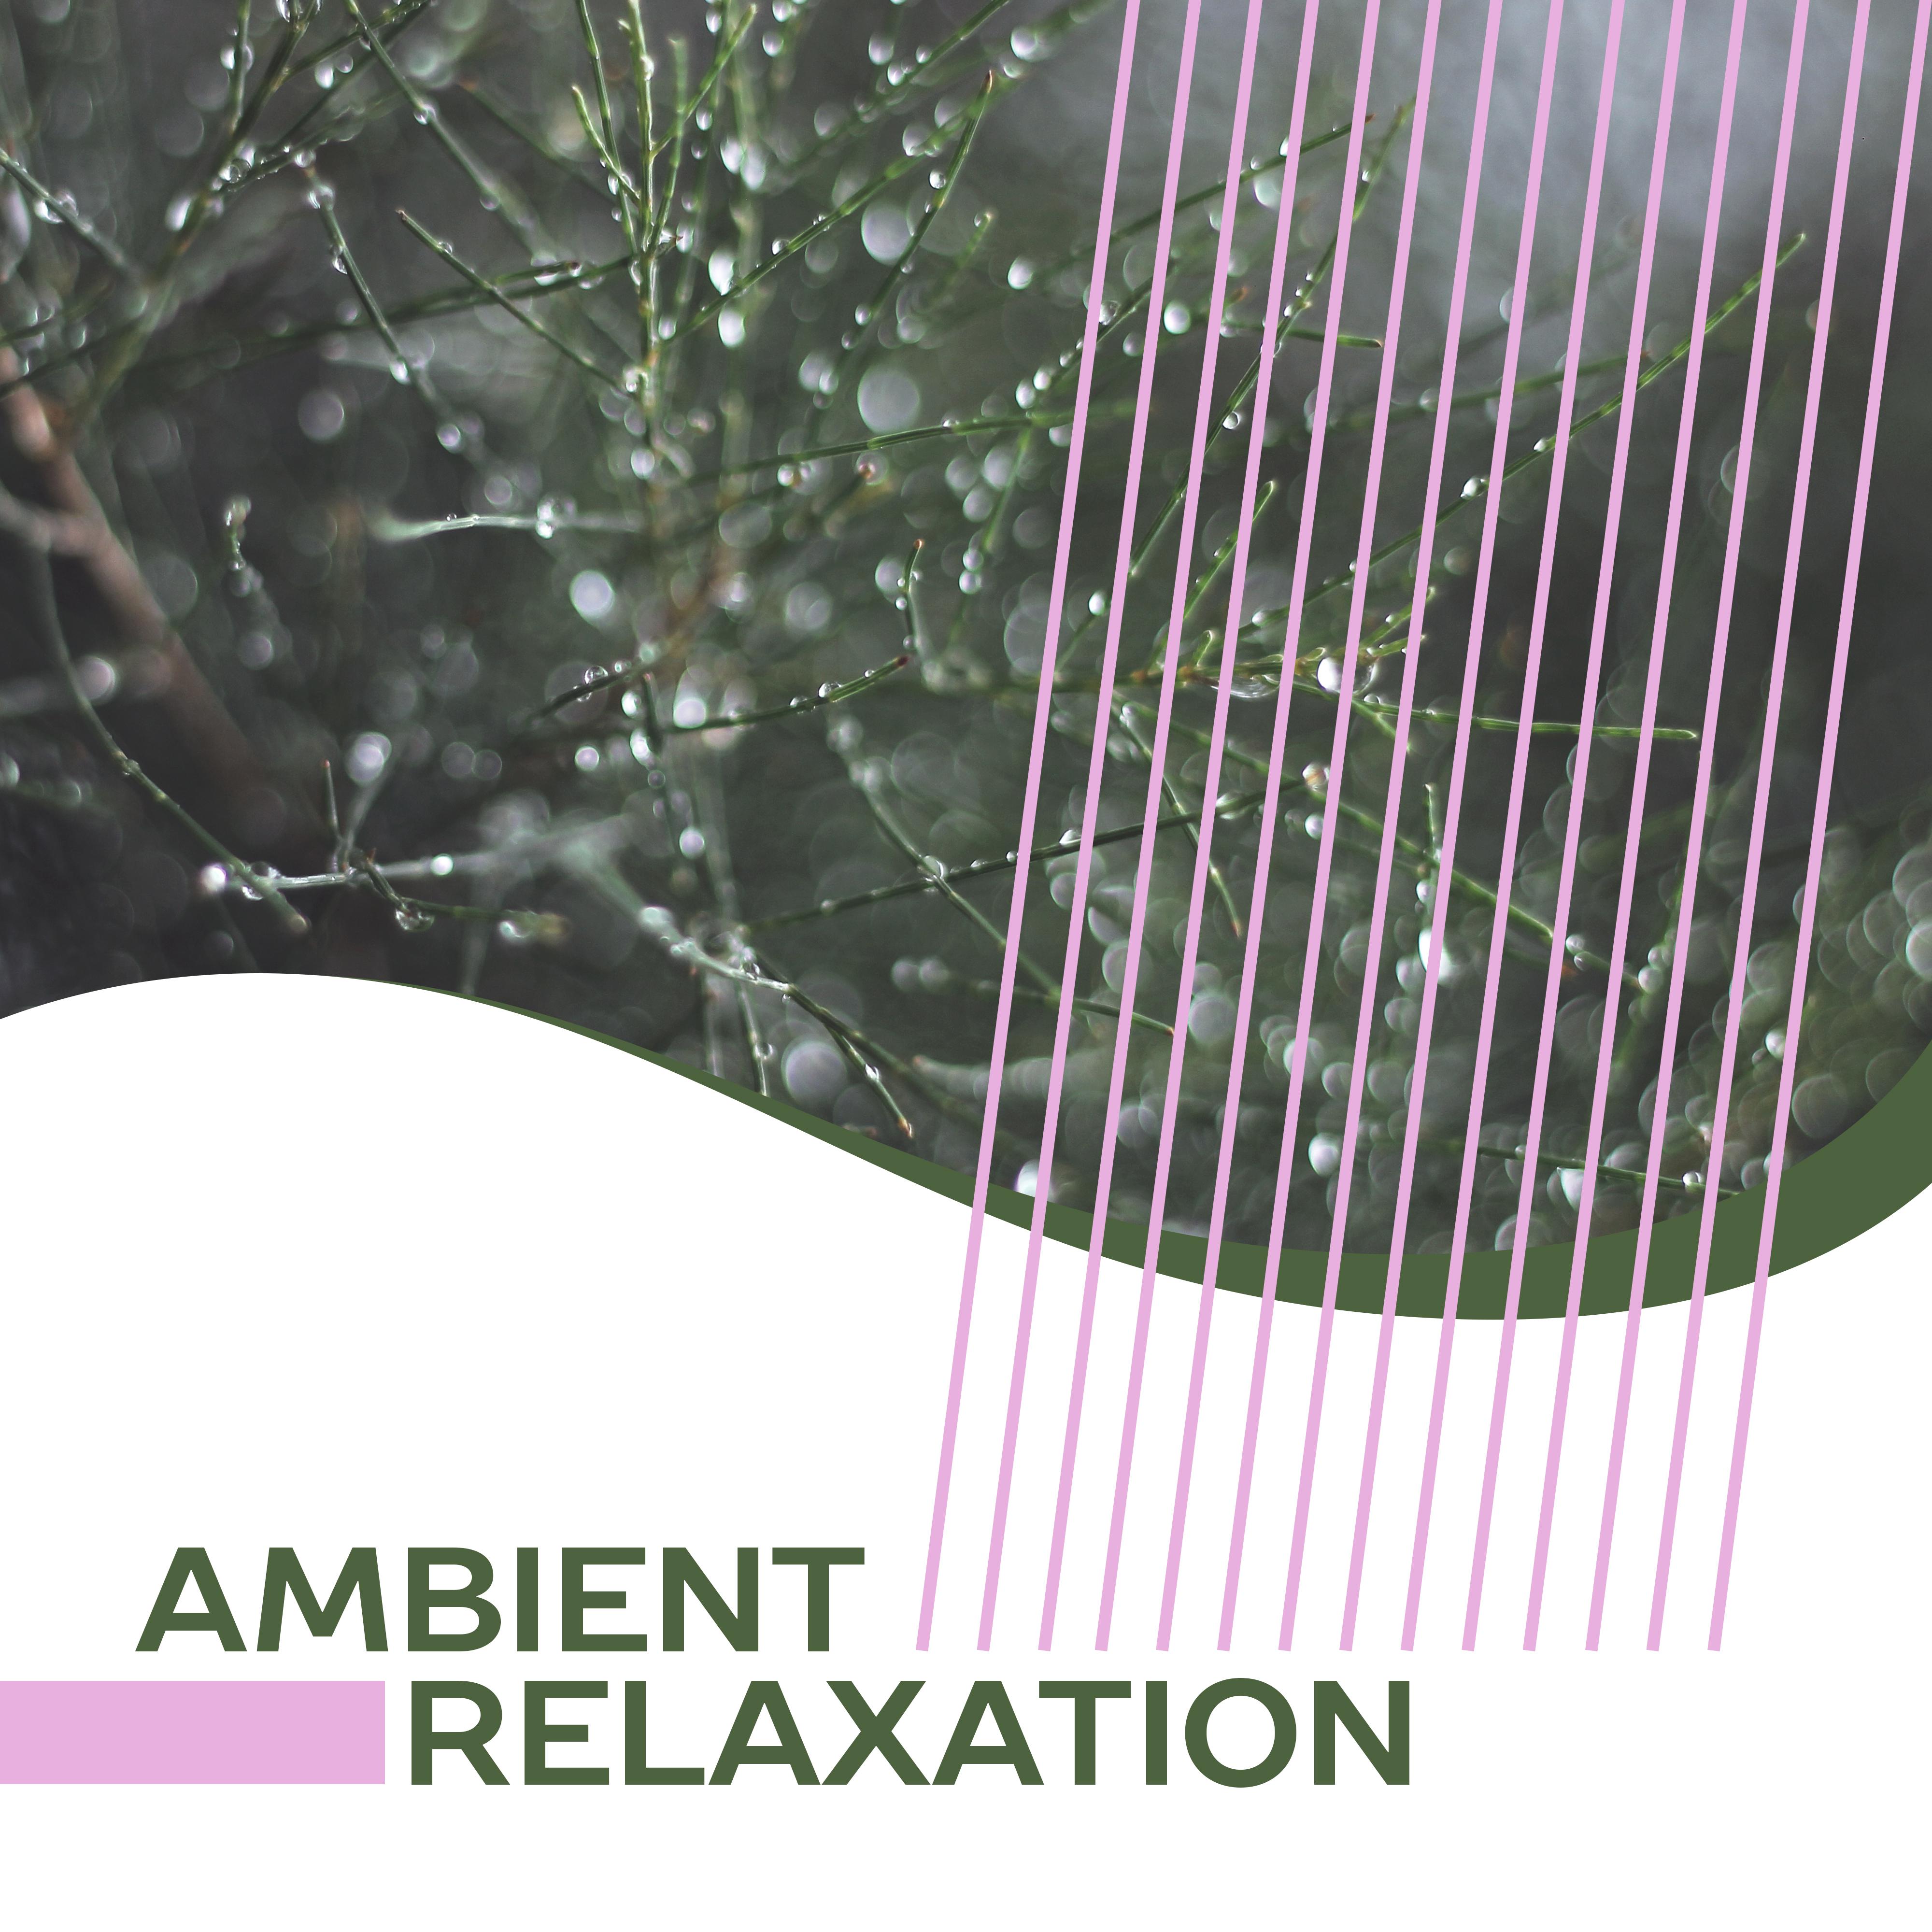 Ambient Relaxation  New Age Music, Helpful for Rest, Deep Relaxation, Sounds of Nature